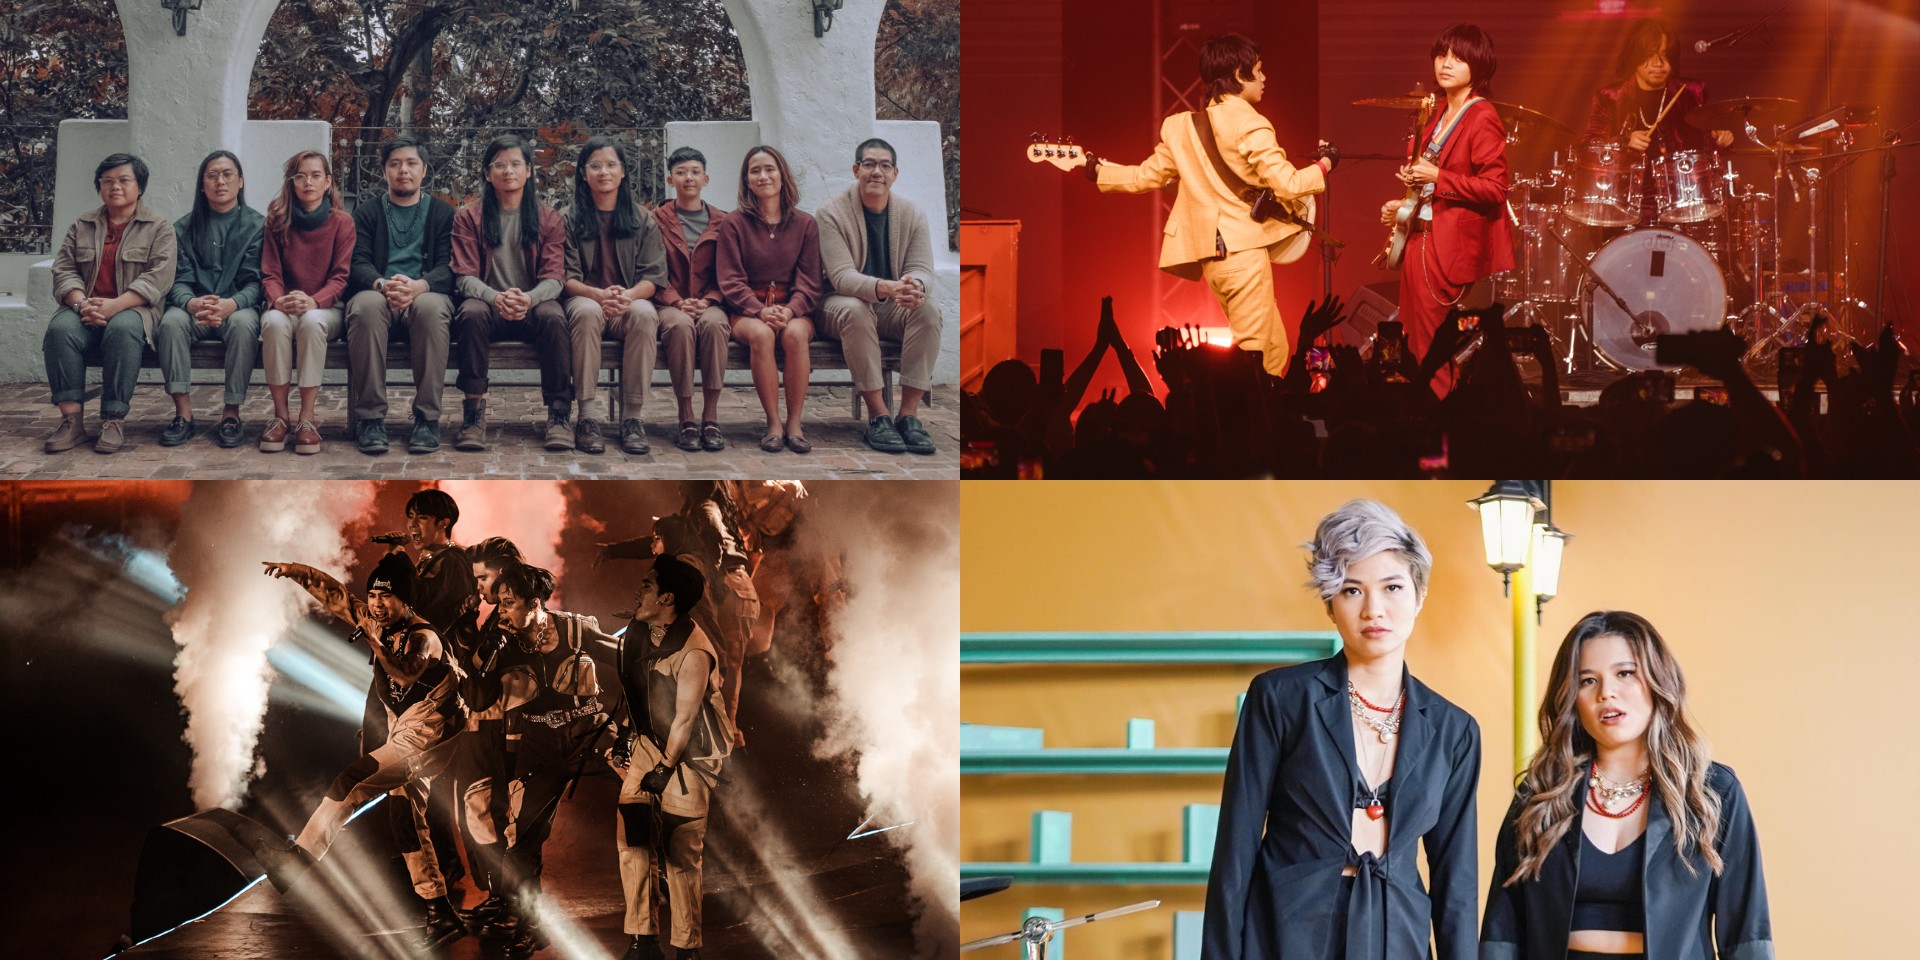 SB19, Ben&Ben, Leanne & Naara, IV of Spades, and more win at the 34th Awit Awards